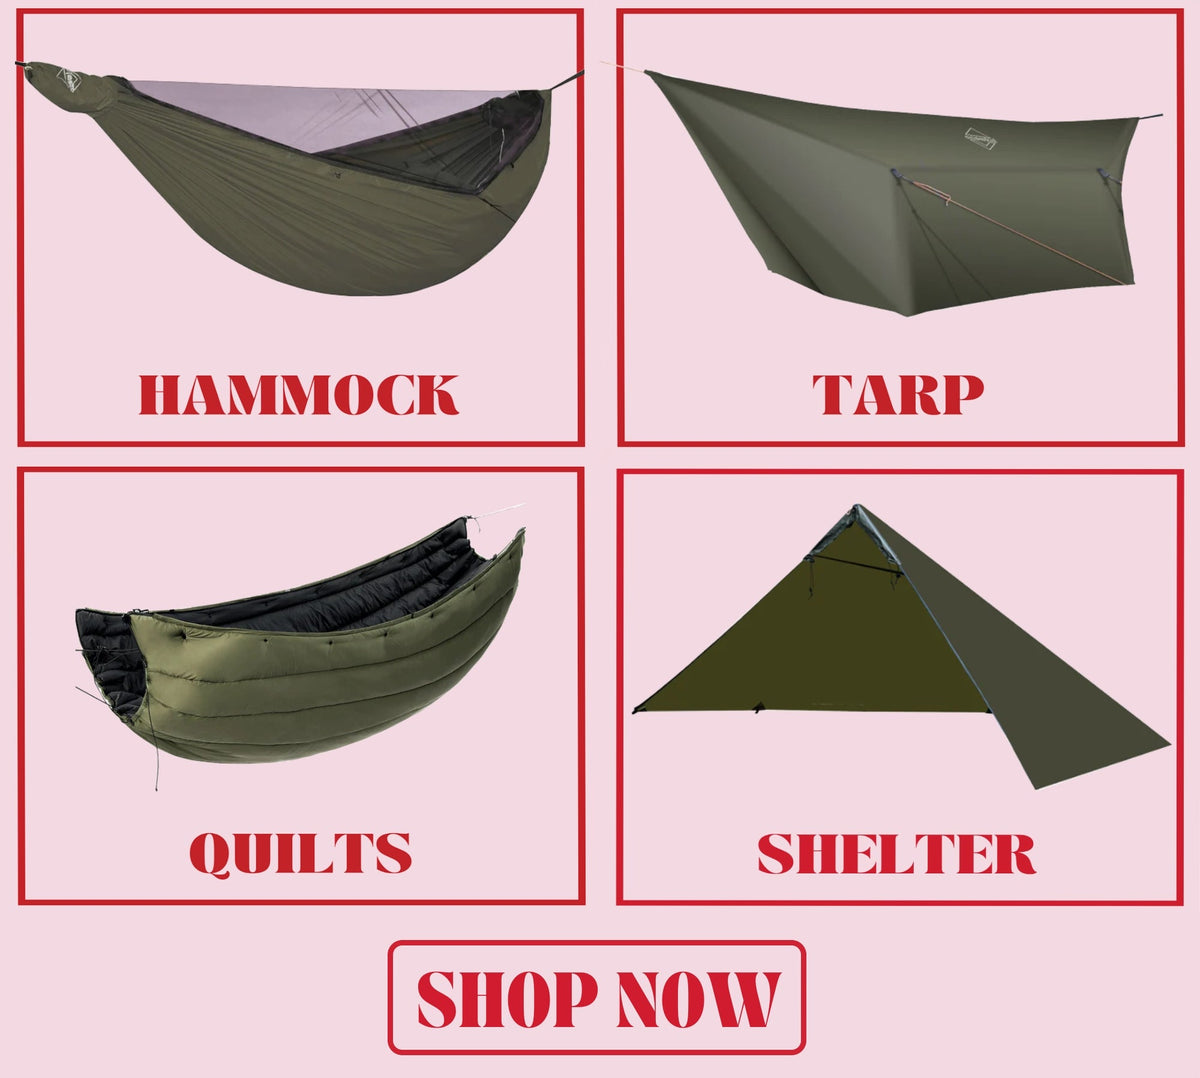 onewind camping hammock | Tarp rainfly | Shelter | quilts